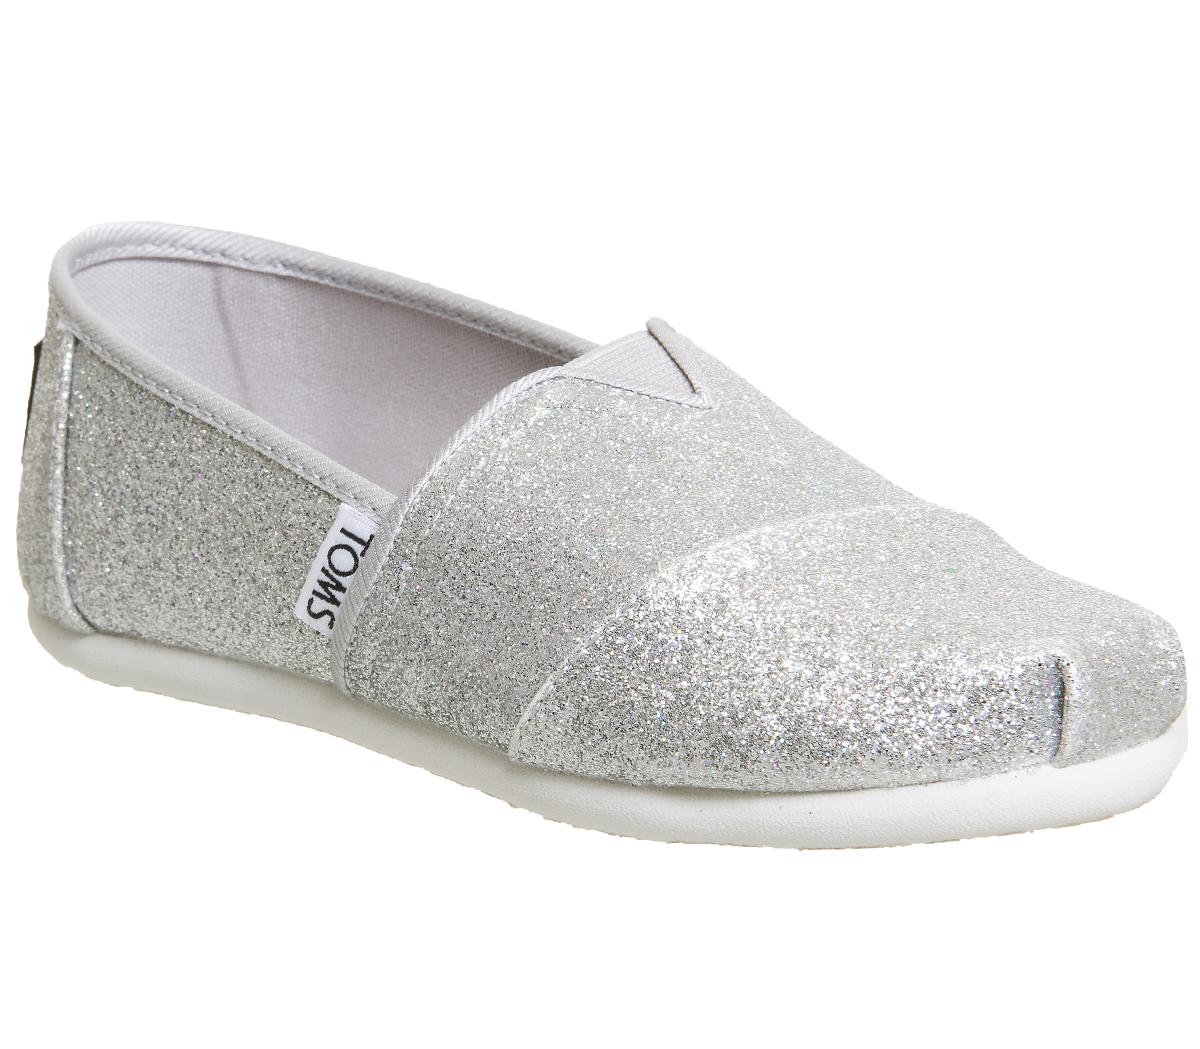 Toms Youth Classics Silver Glitter - Unisex